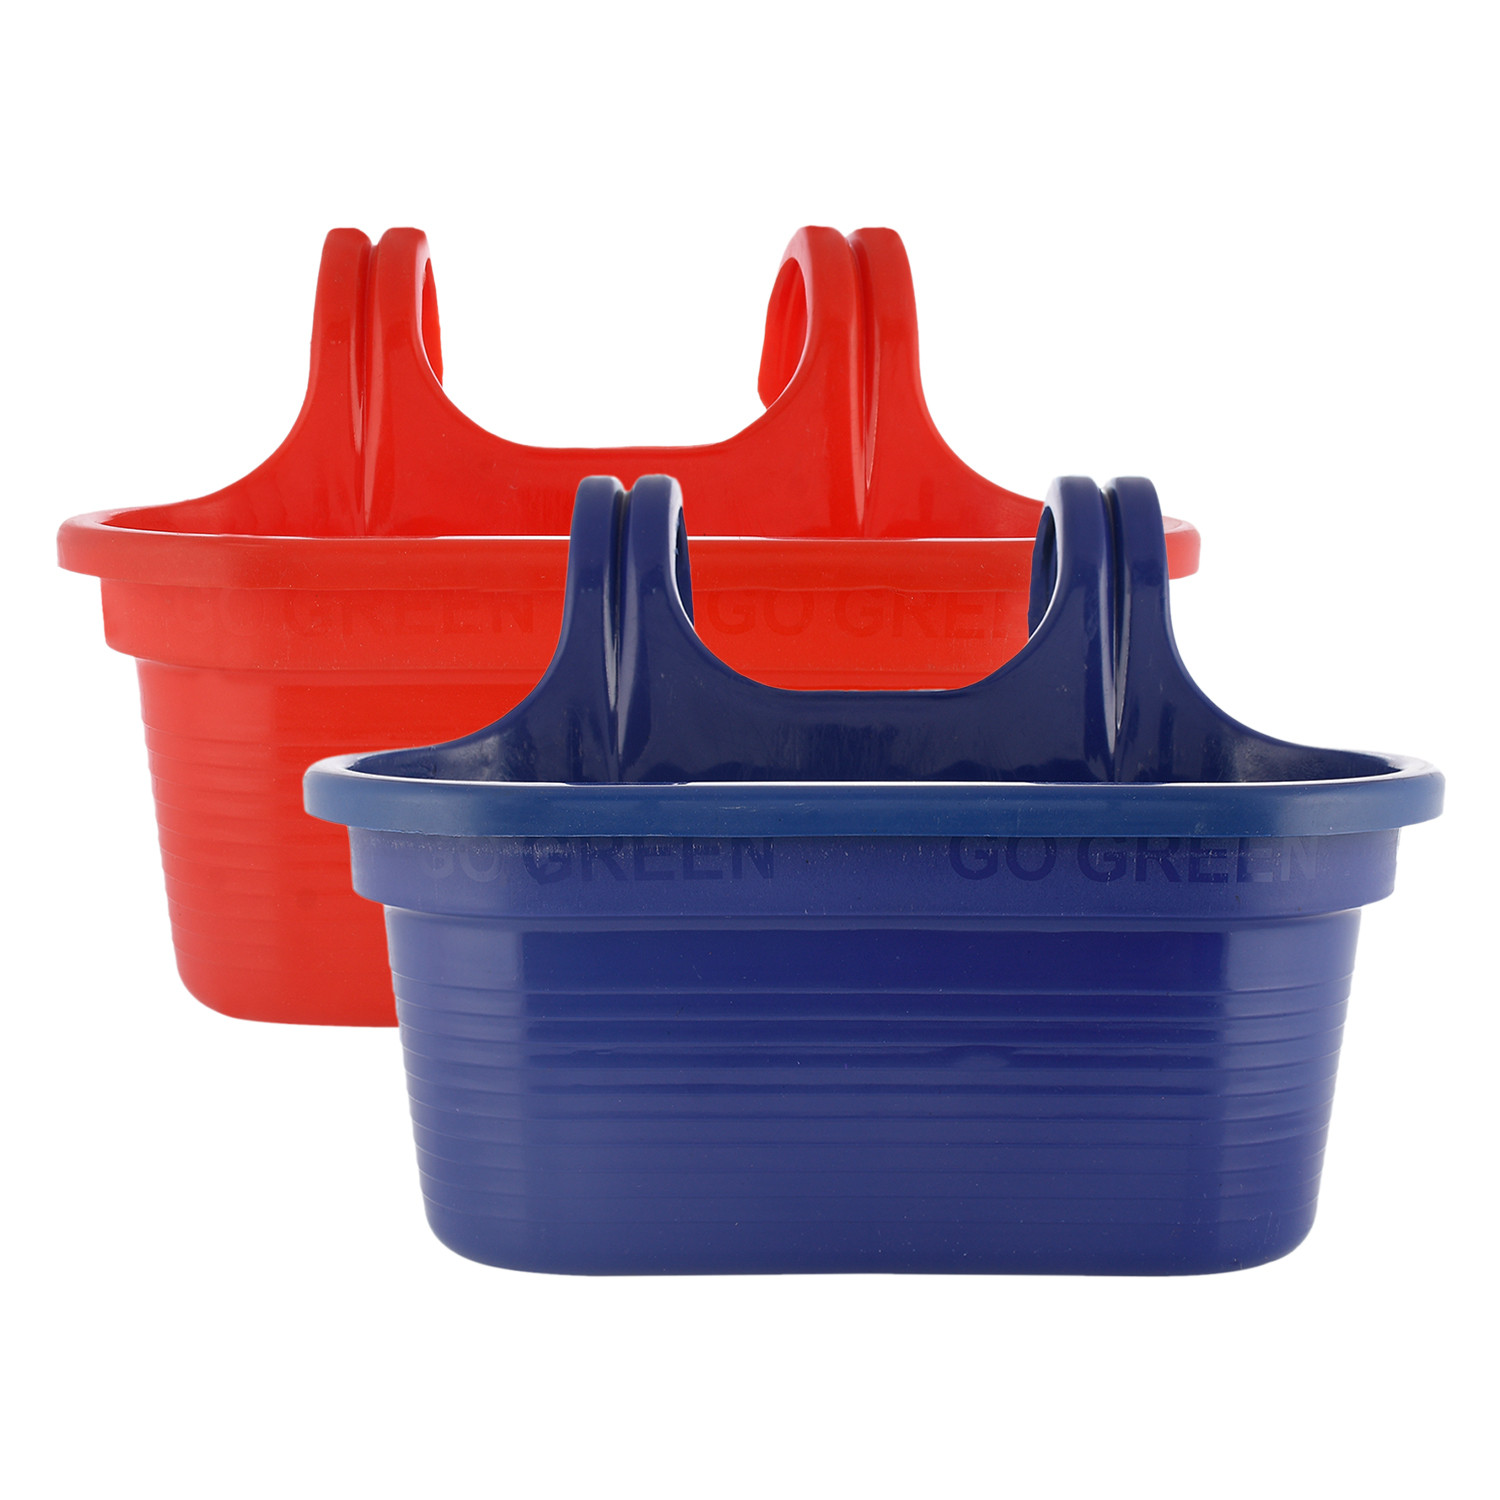 Kuber Industries Hanging Flower Pot|Double Hook Plant Container|Durable Plastic Glossy Finish Pots for Home|Balcony|Garden|12 Inch|Pack of 2 (Blue & Red)